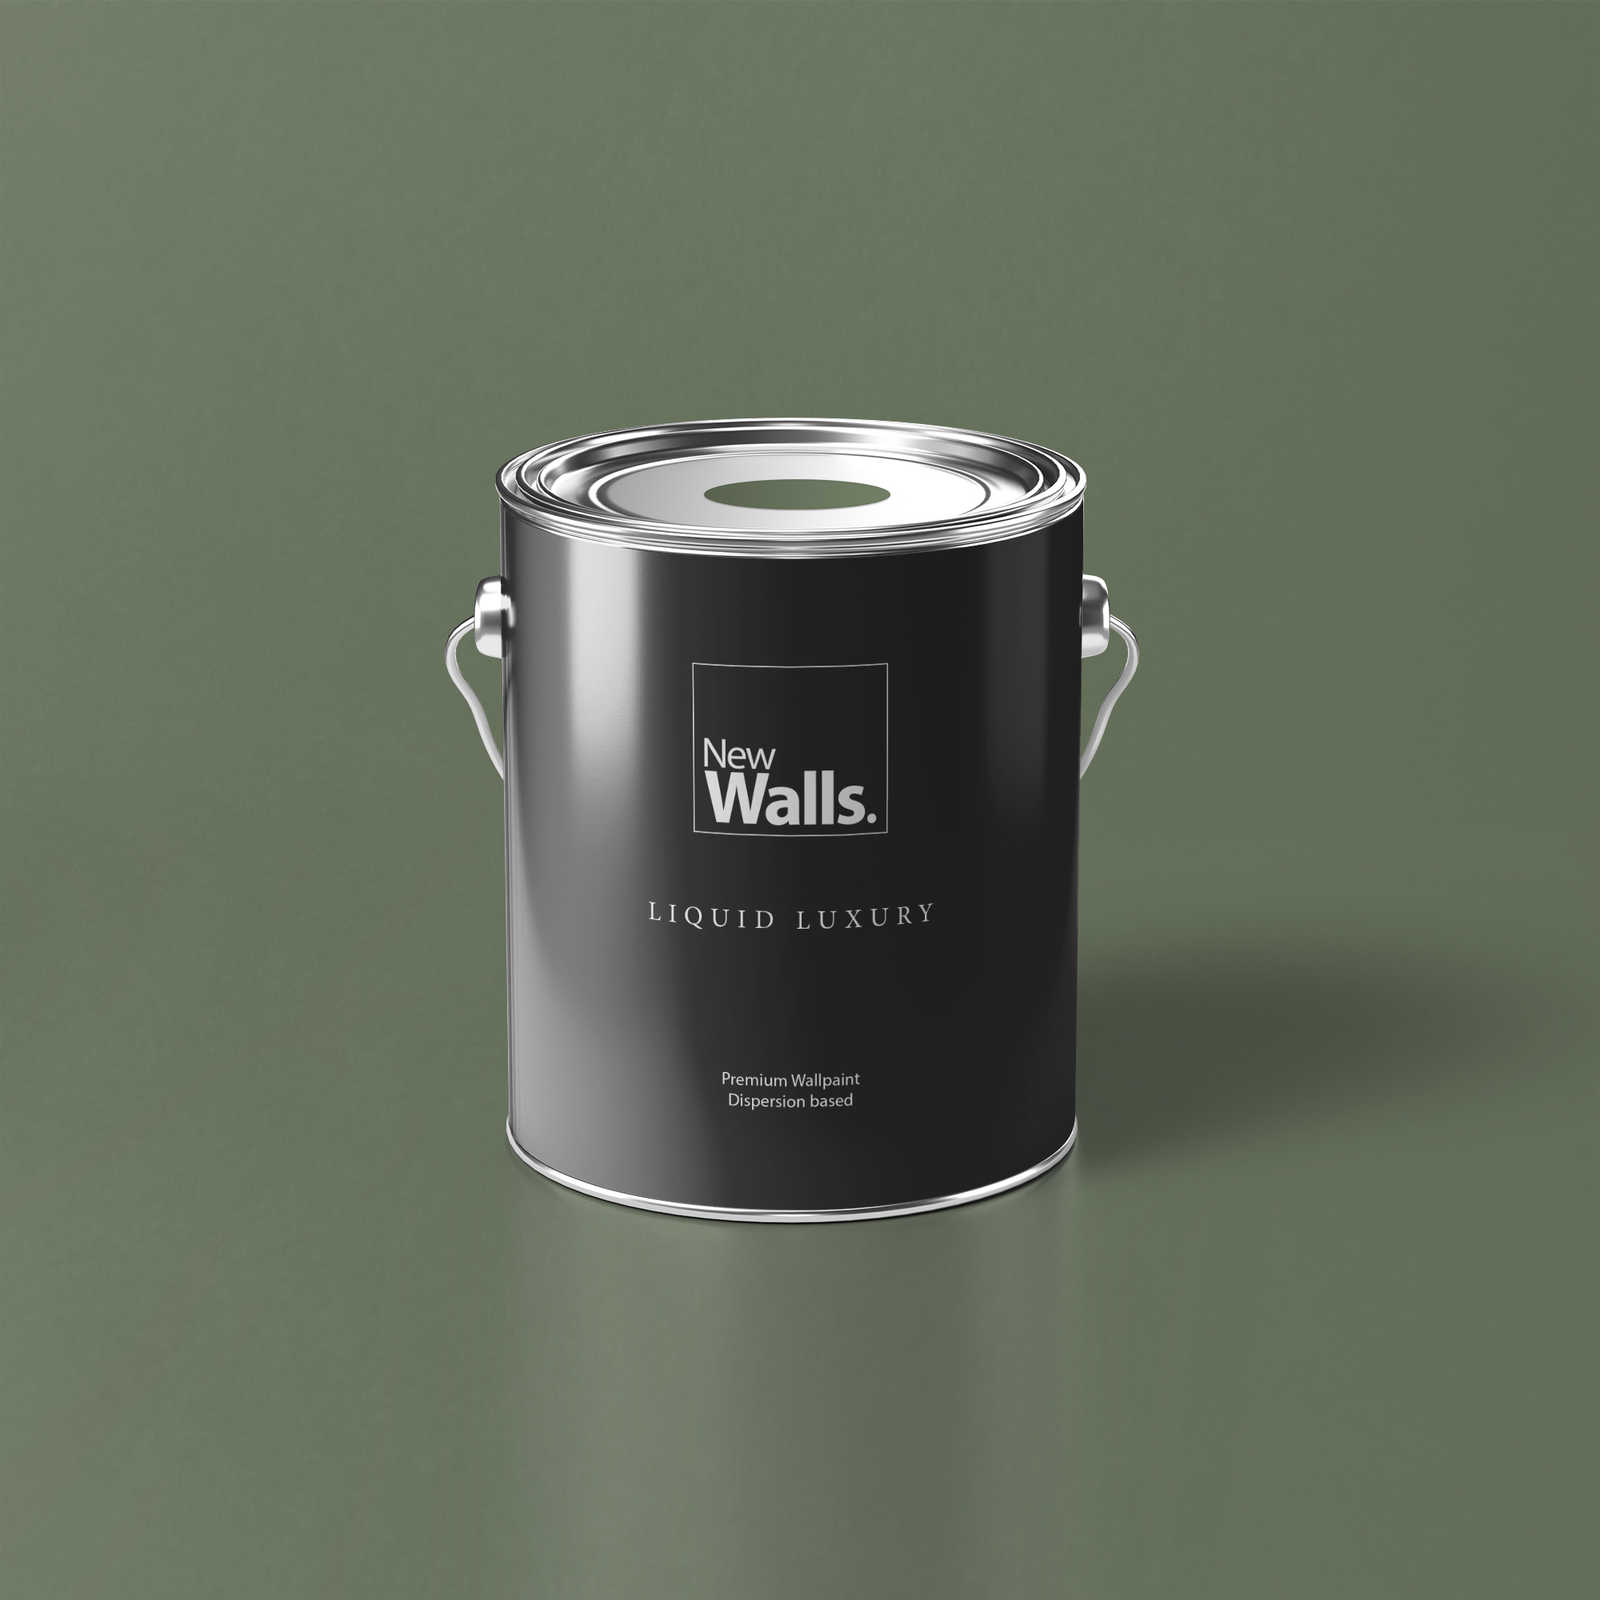 Premium Wall Paint Relaxing Olive Green »Gorgeous Green« NW504 – 5 litre
